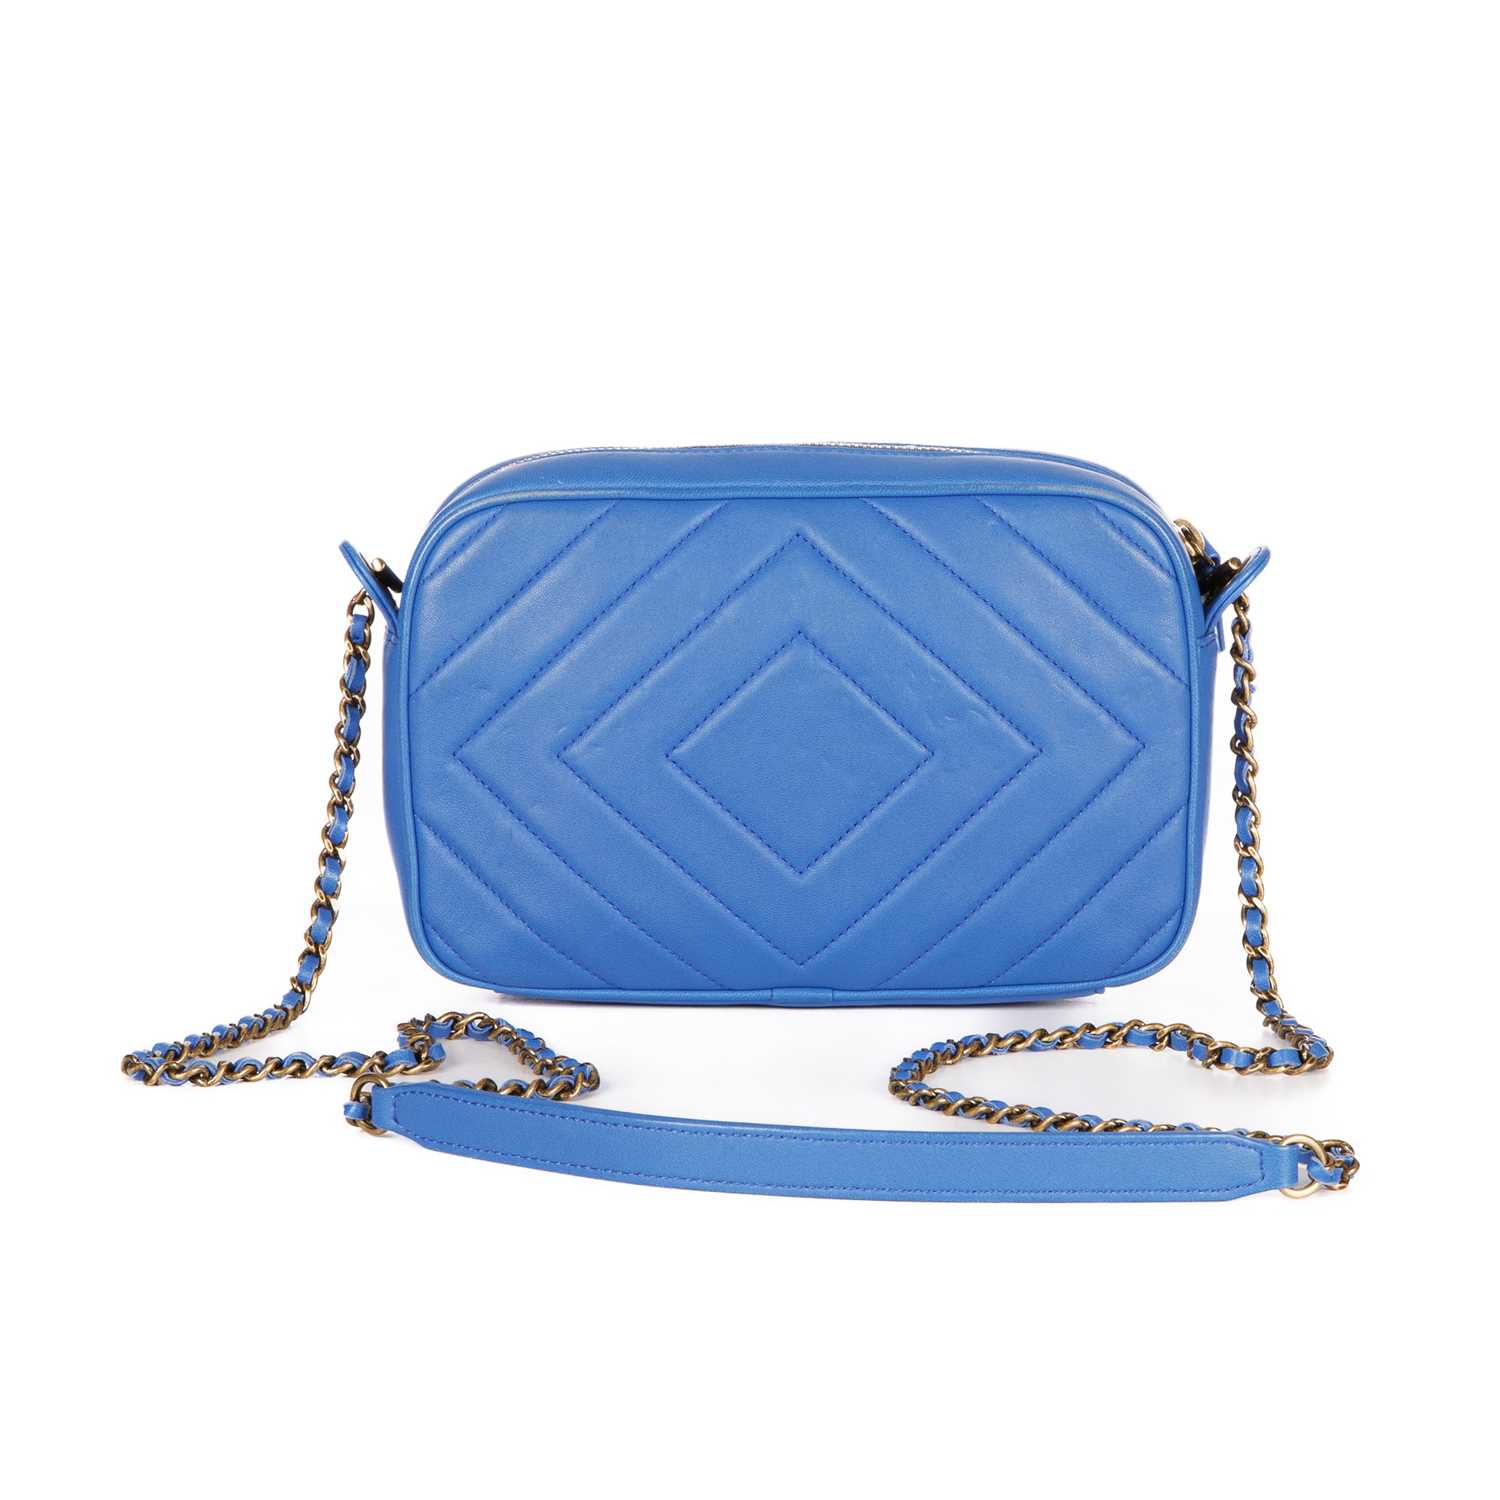 Chanel, a Pyramid camera bag, featuring a blue diamond-quilted leather exterior, with aged gold-tone - Image 2 of 4